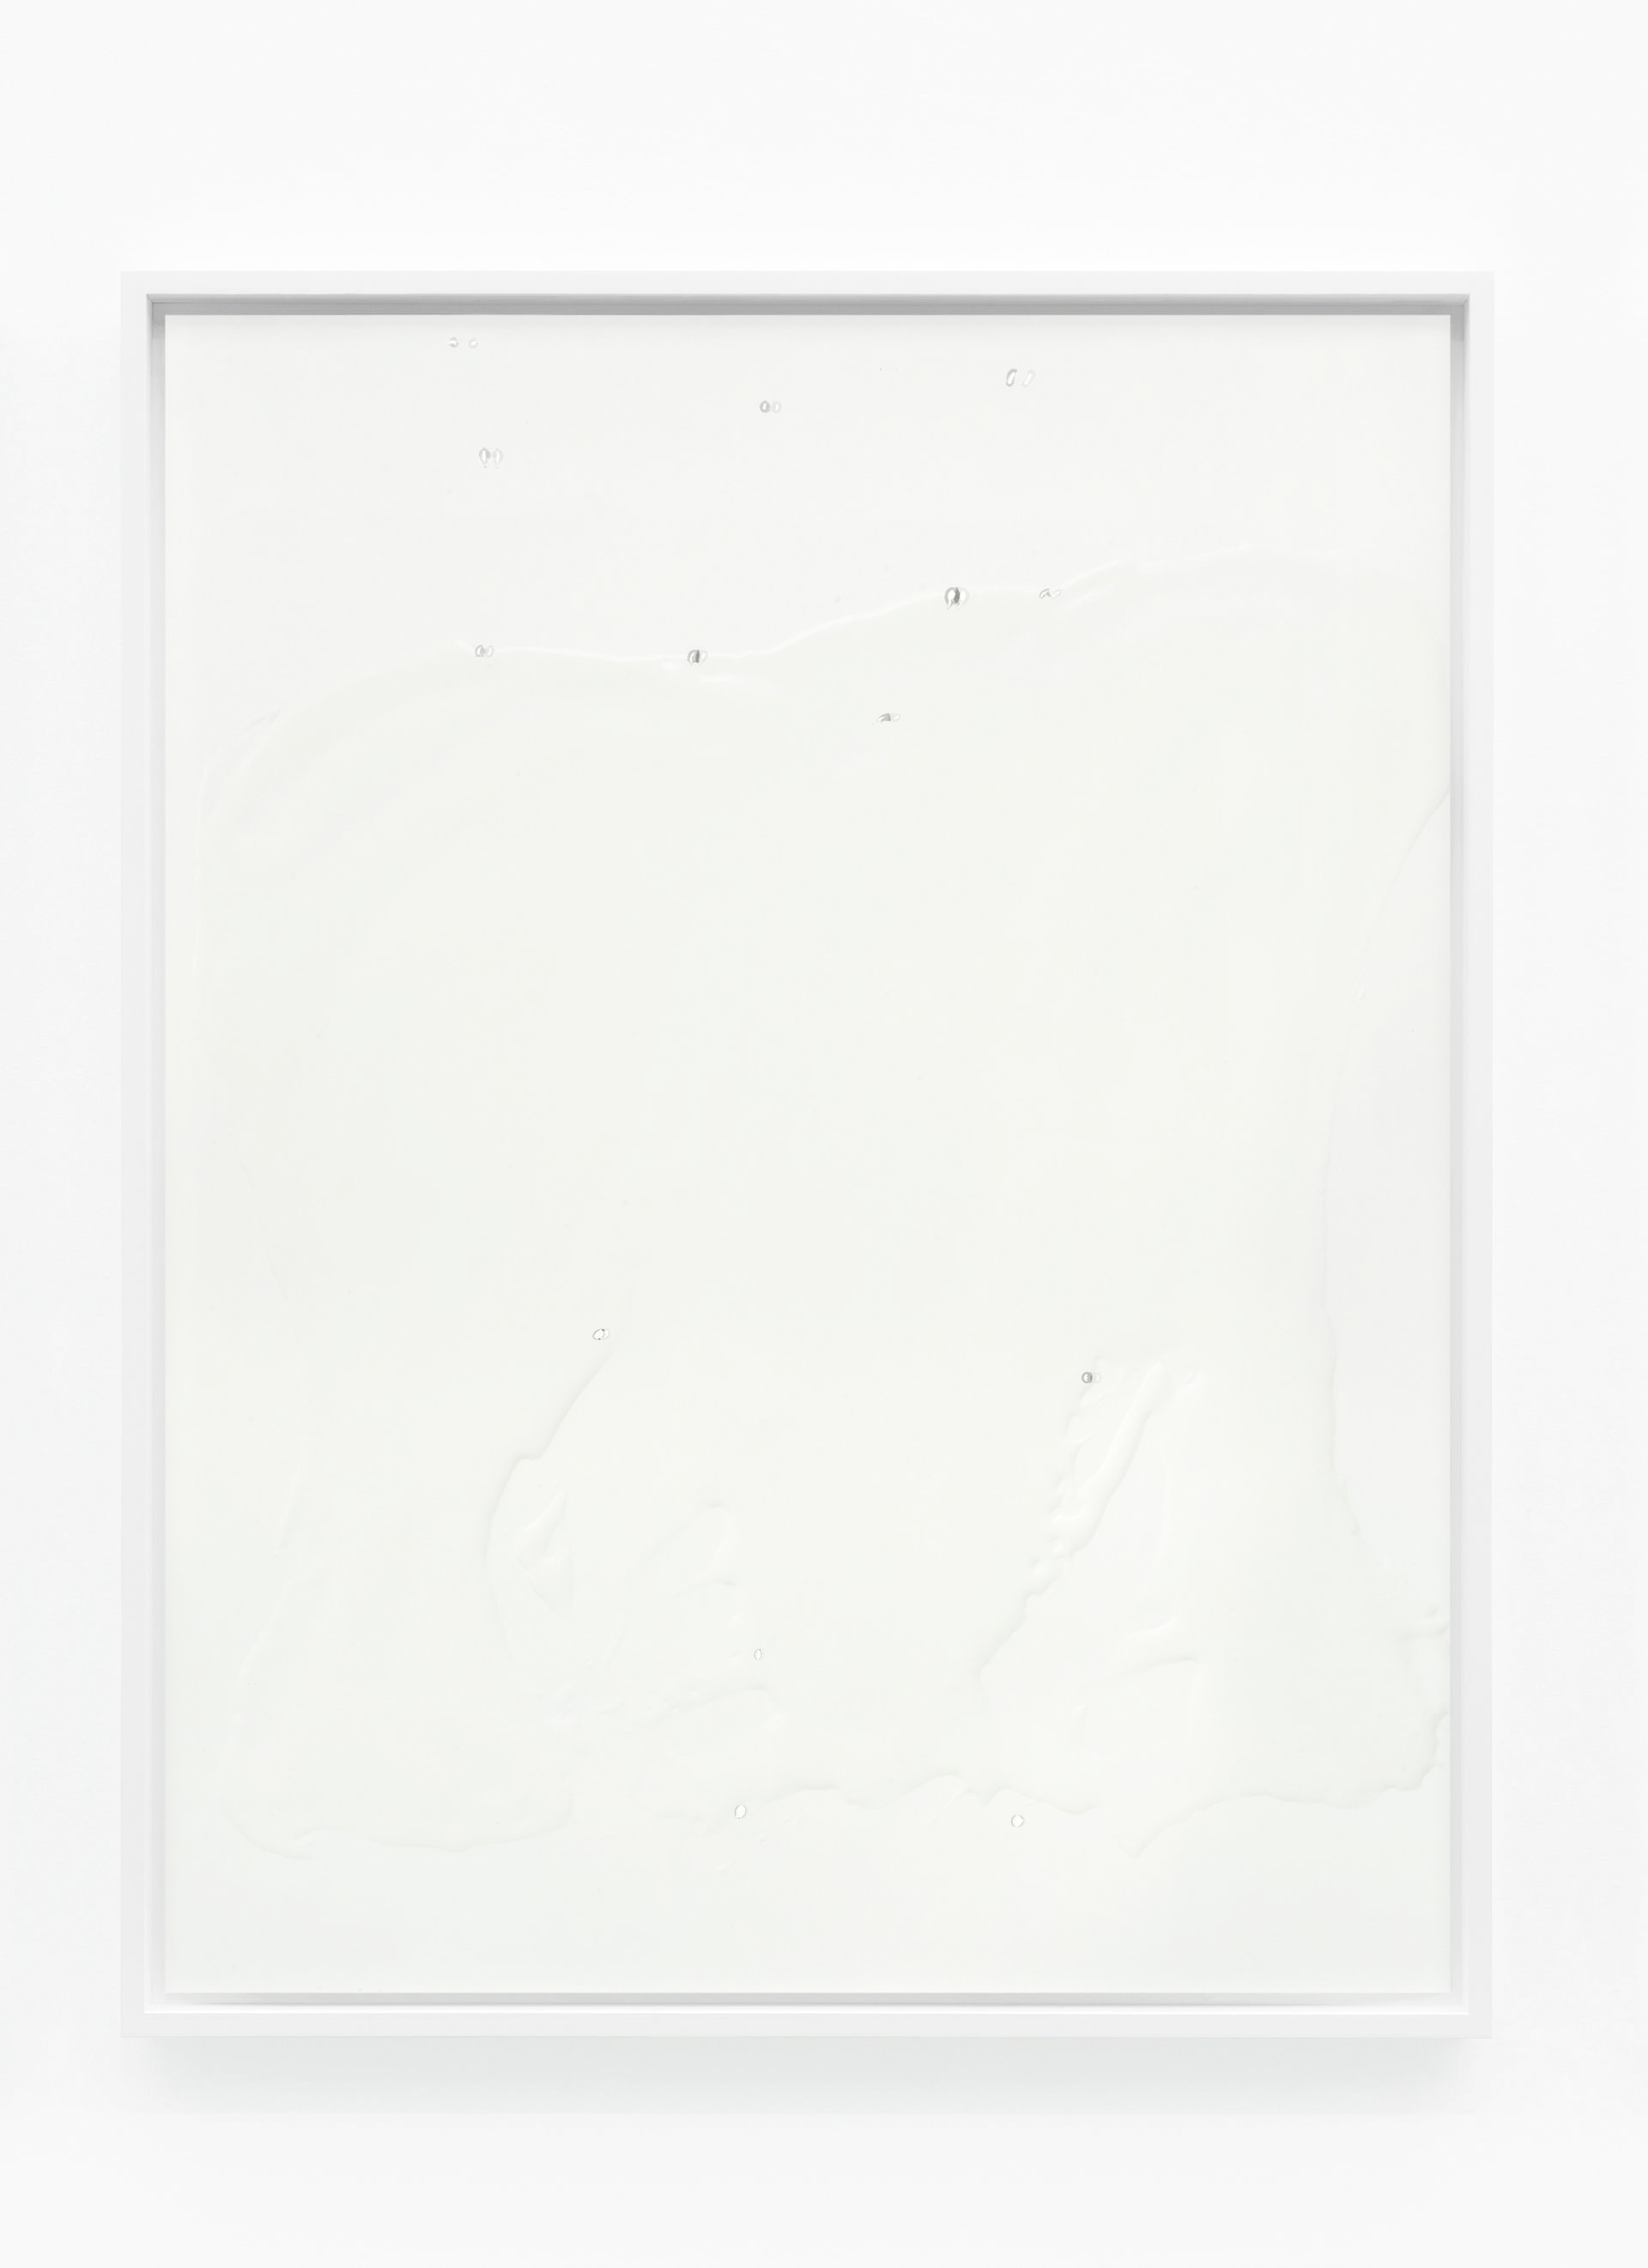 Lisa HolzerNot yet titled, 2016Pigment print on cotton paper, crystal clear 202/1, polyurethane and acrylic paint on glass110.3 x 86.3 cm